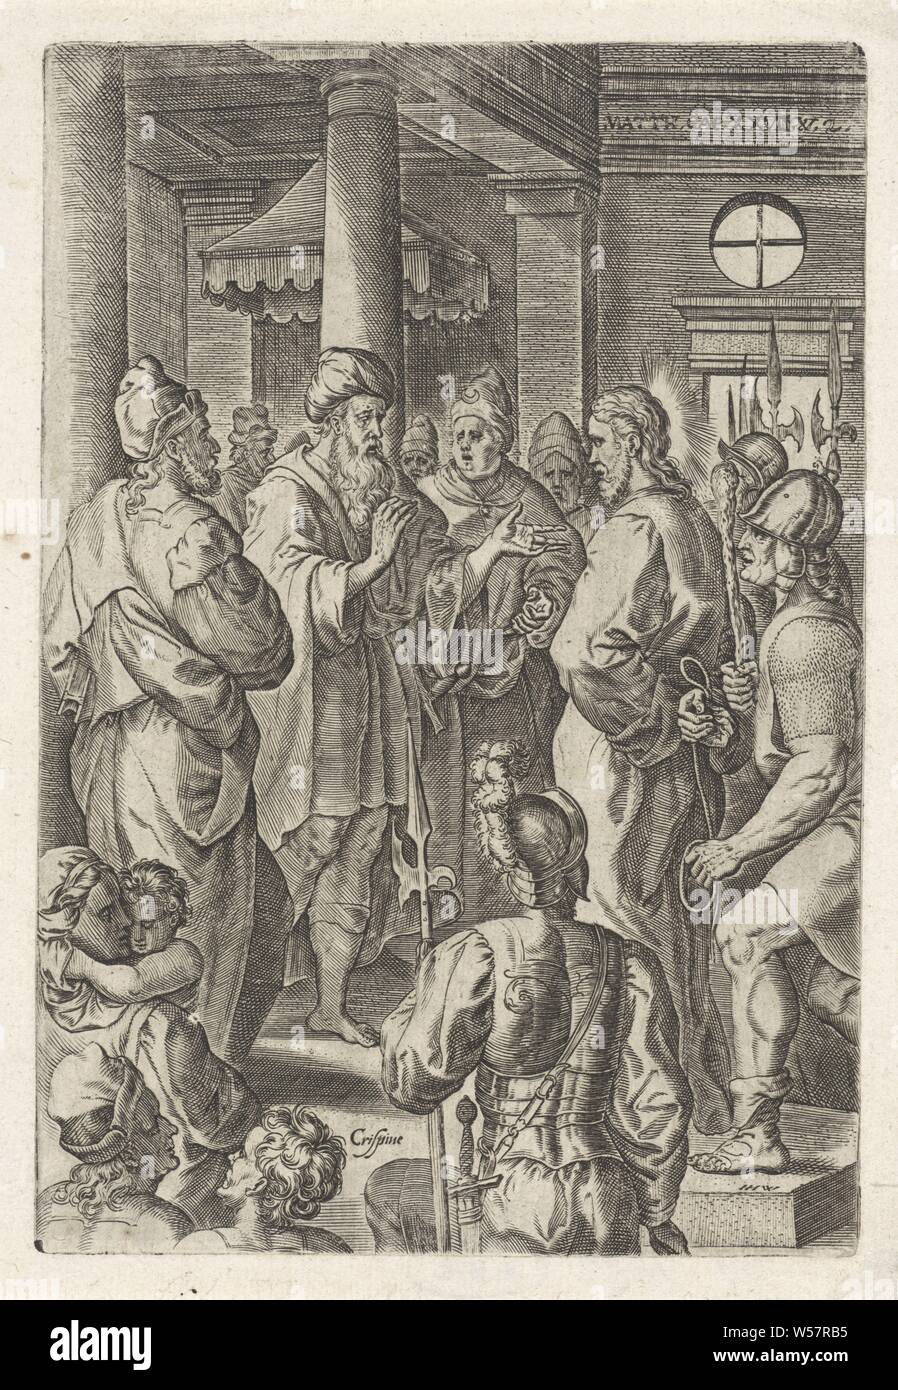 Christ before Pilate, Johannes Wierix (mentioned on object), Antwerp, 1576, paper, engraving, h 167 mm × w 114 mm Stock Photo